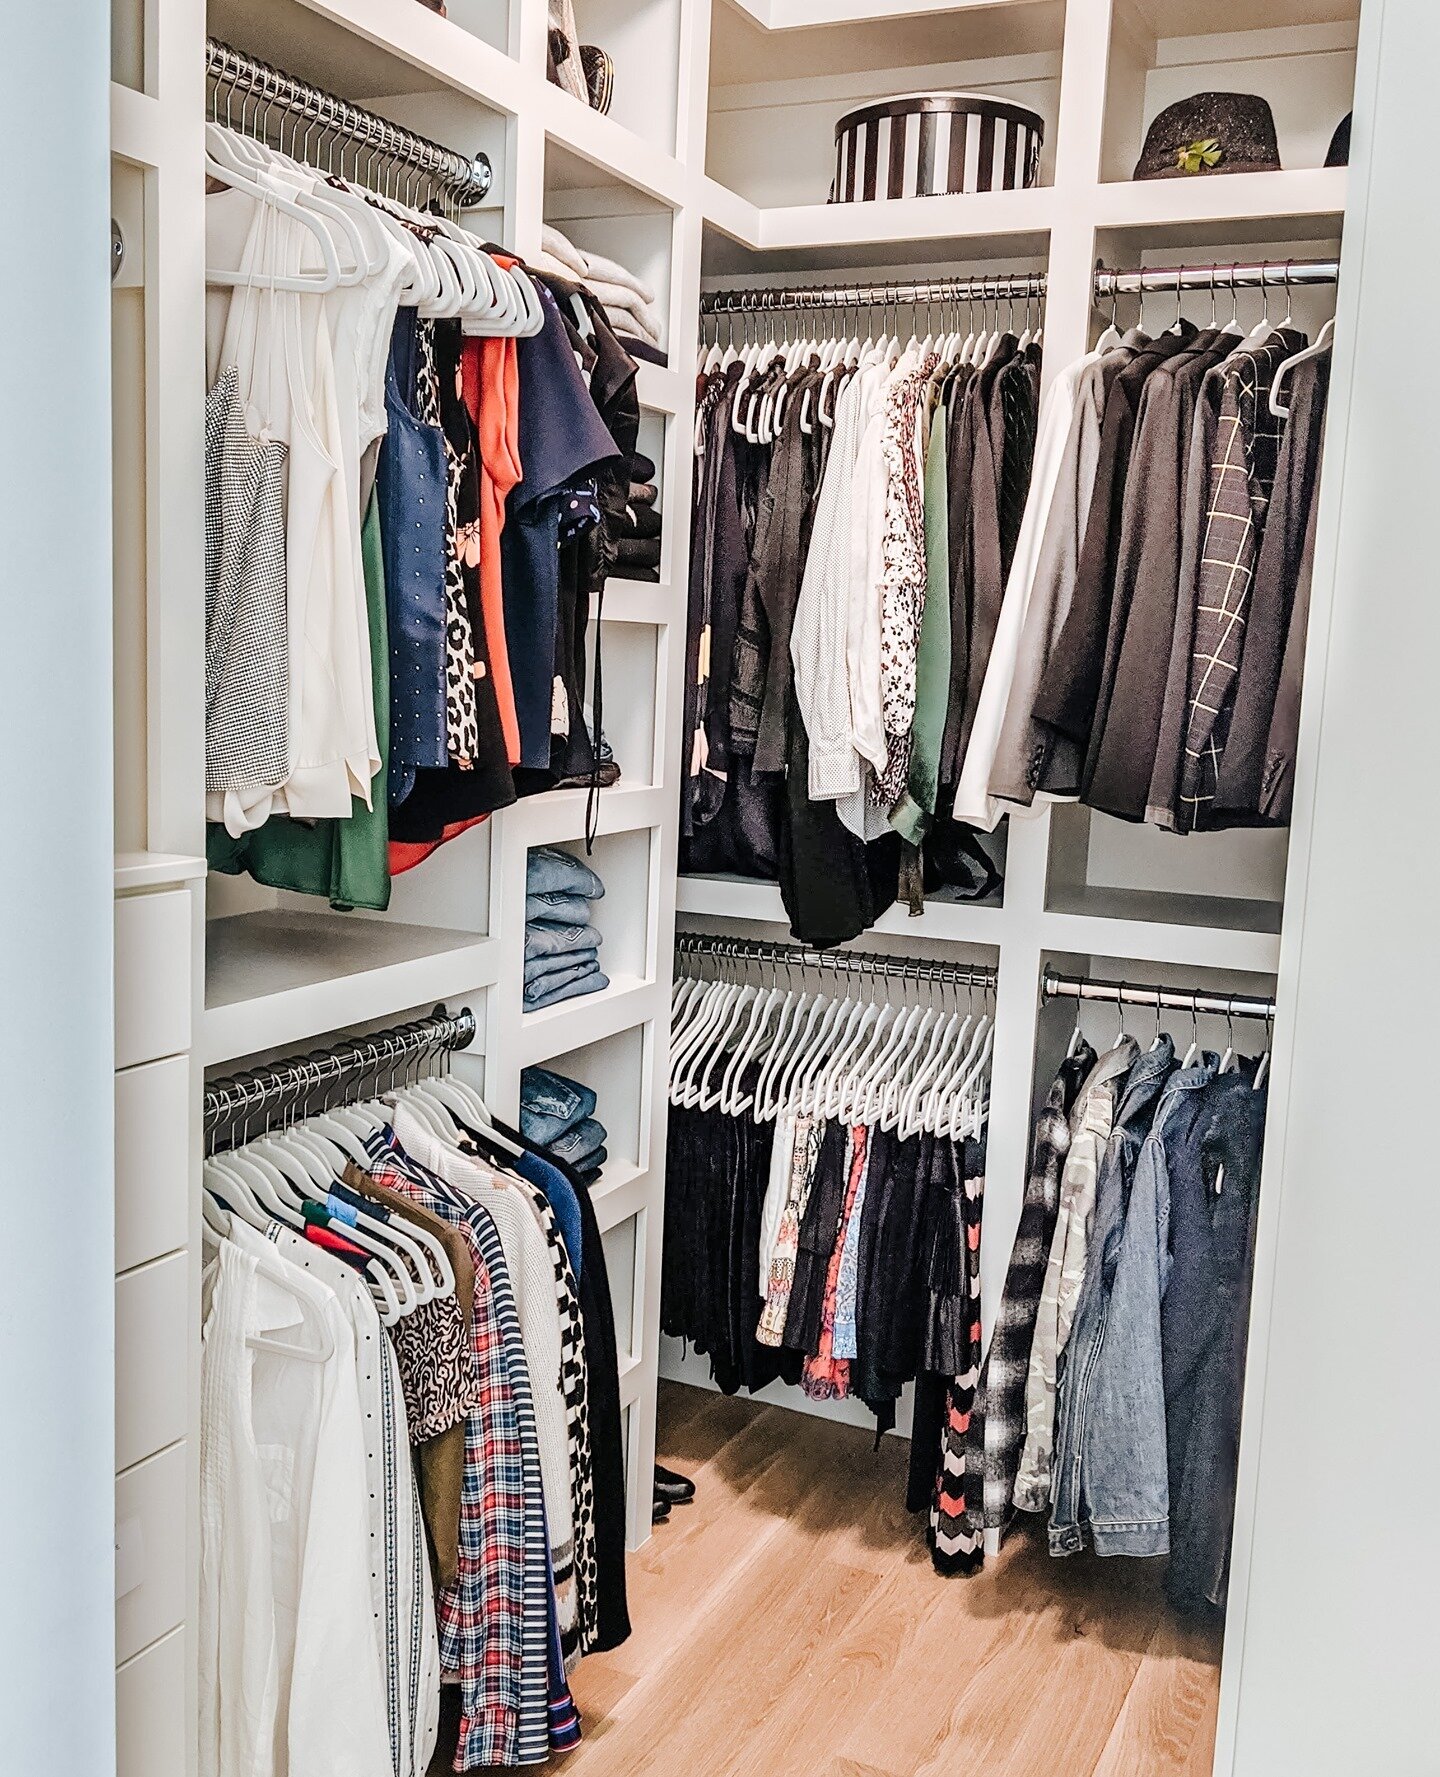 Once a closet is done and you take that step back and see everything neatly put in with matching hangers there's no better feeling of satisfaction.⁠
⁠
Do you get that feeling after an organization project??⁠
⁠
We think the only thing that makes that 